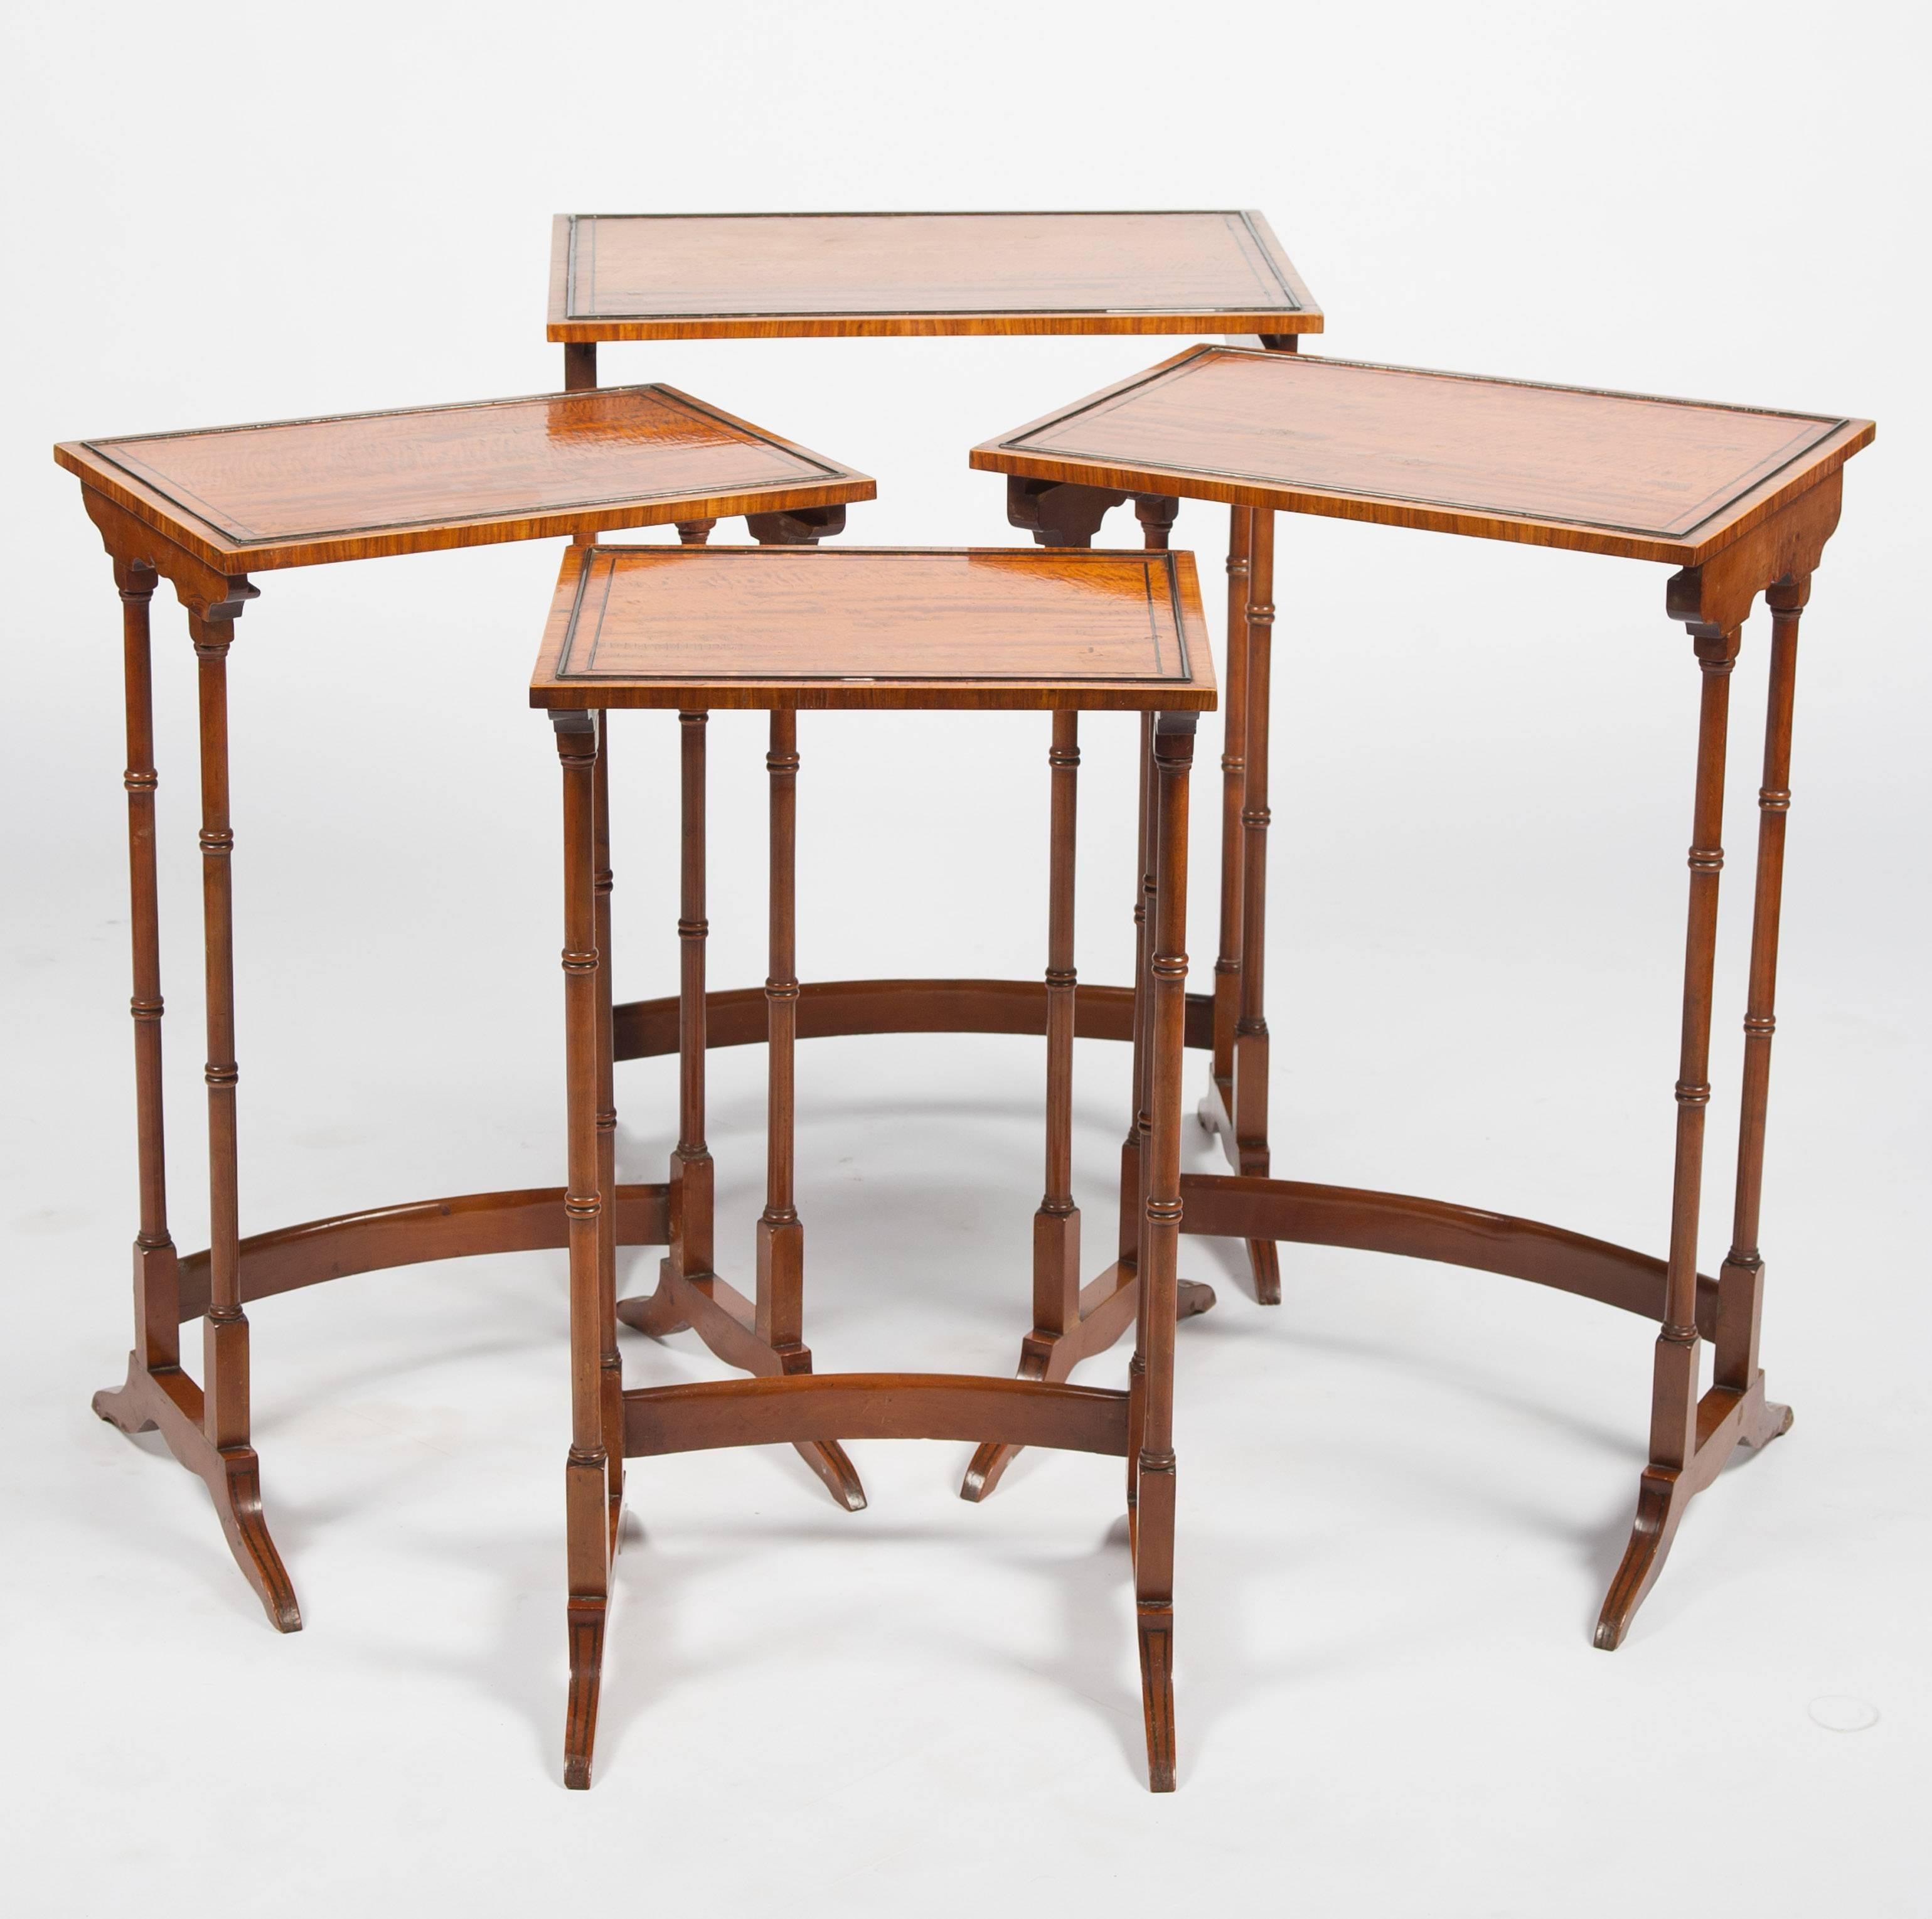 Nest of 19th Century Satinwood Tables In Good Condition For Sale In Brighton, Sussex